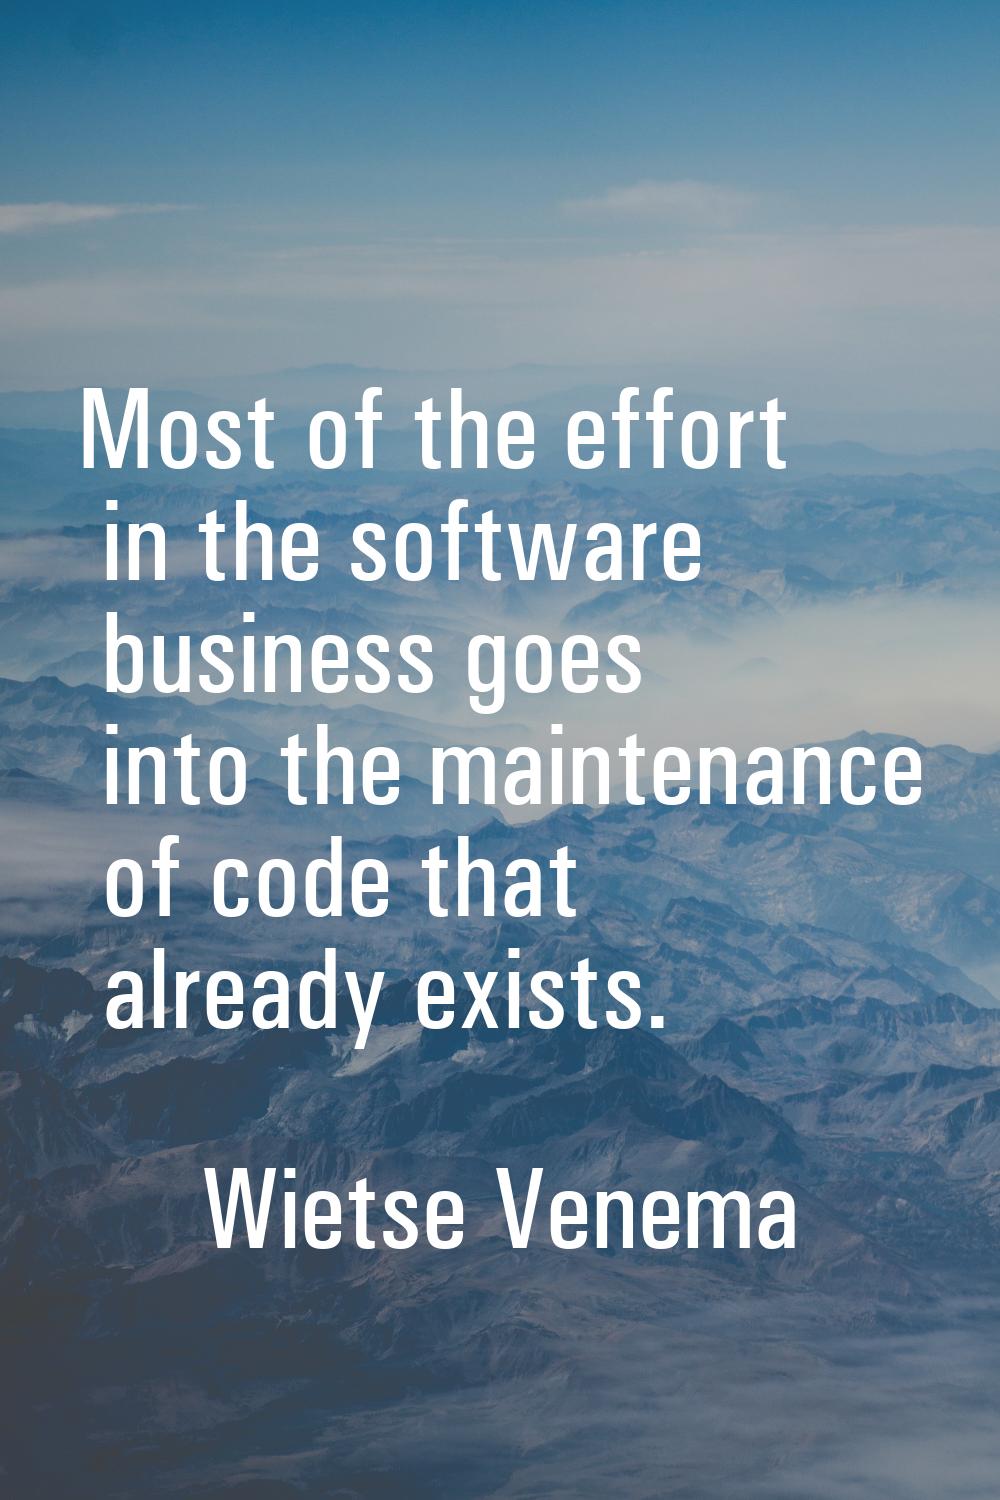 Most of the effort in the software business goes into the maintenance of code that already exists.